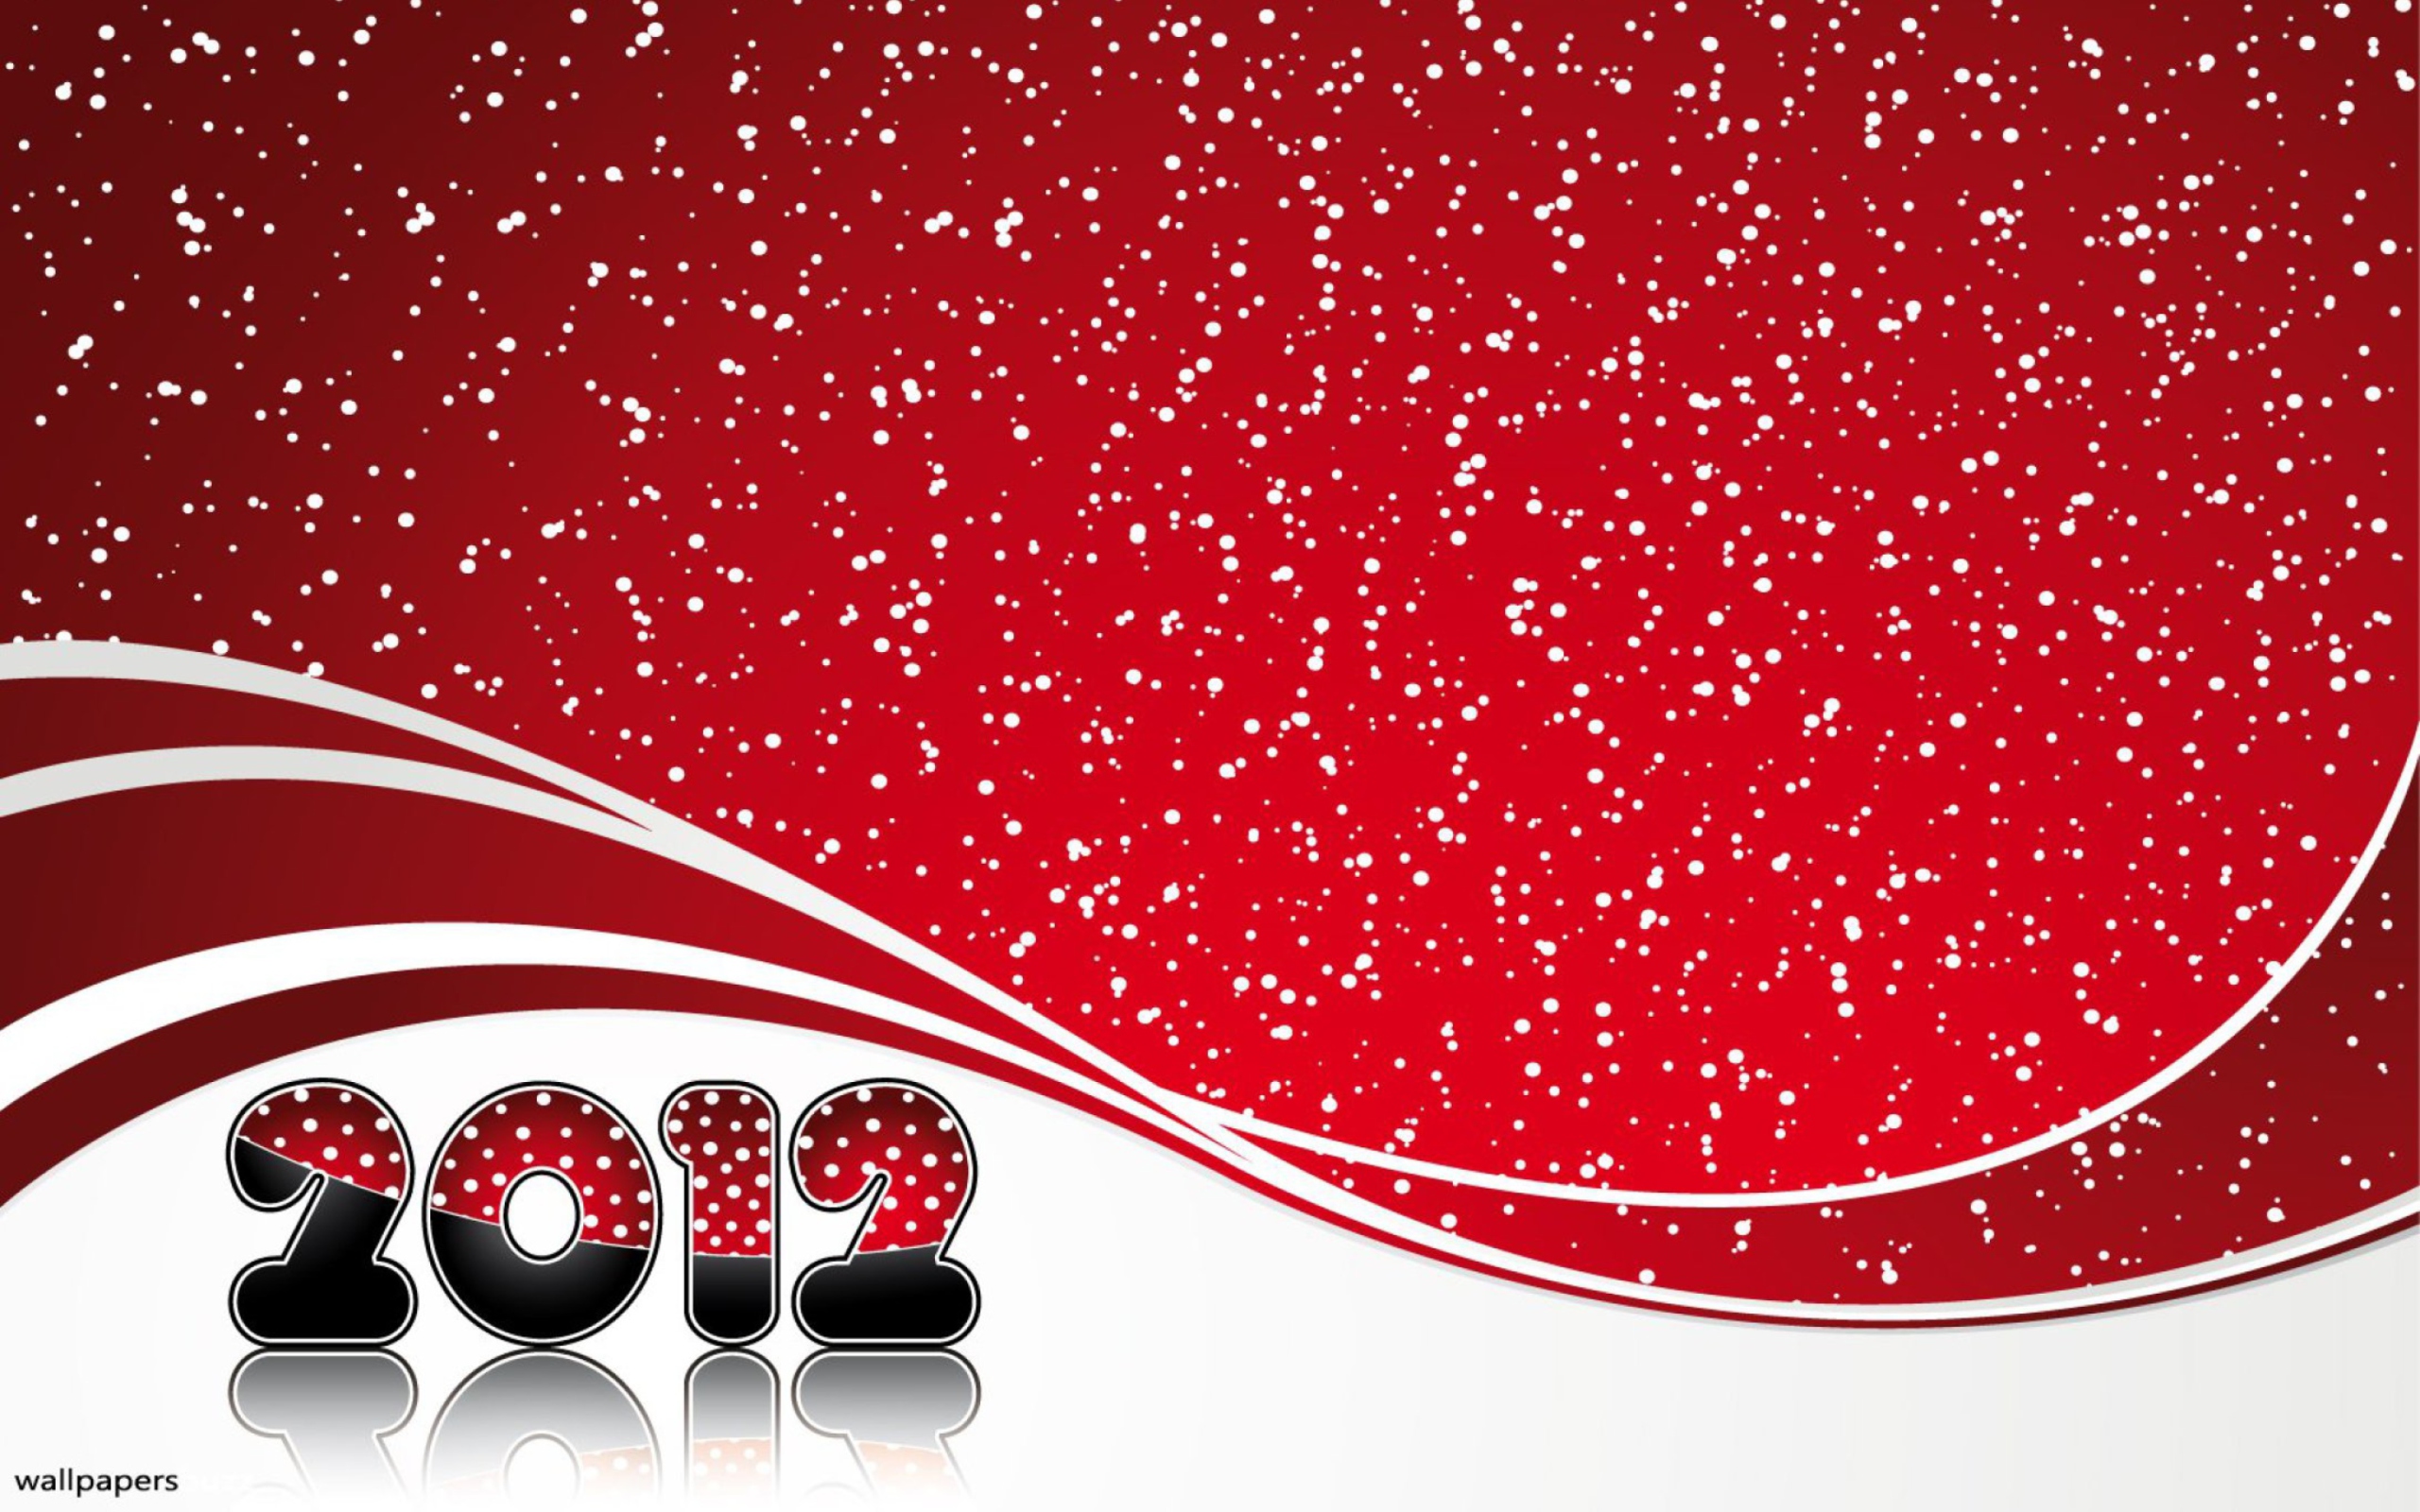 Das Red Snow New Year Wallpaper 2560x1600